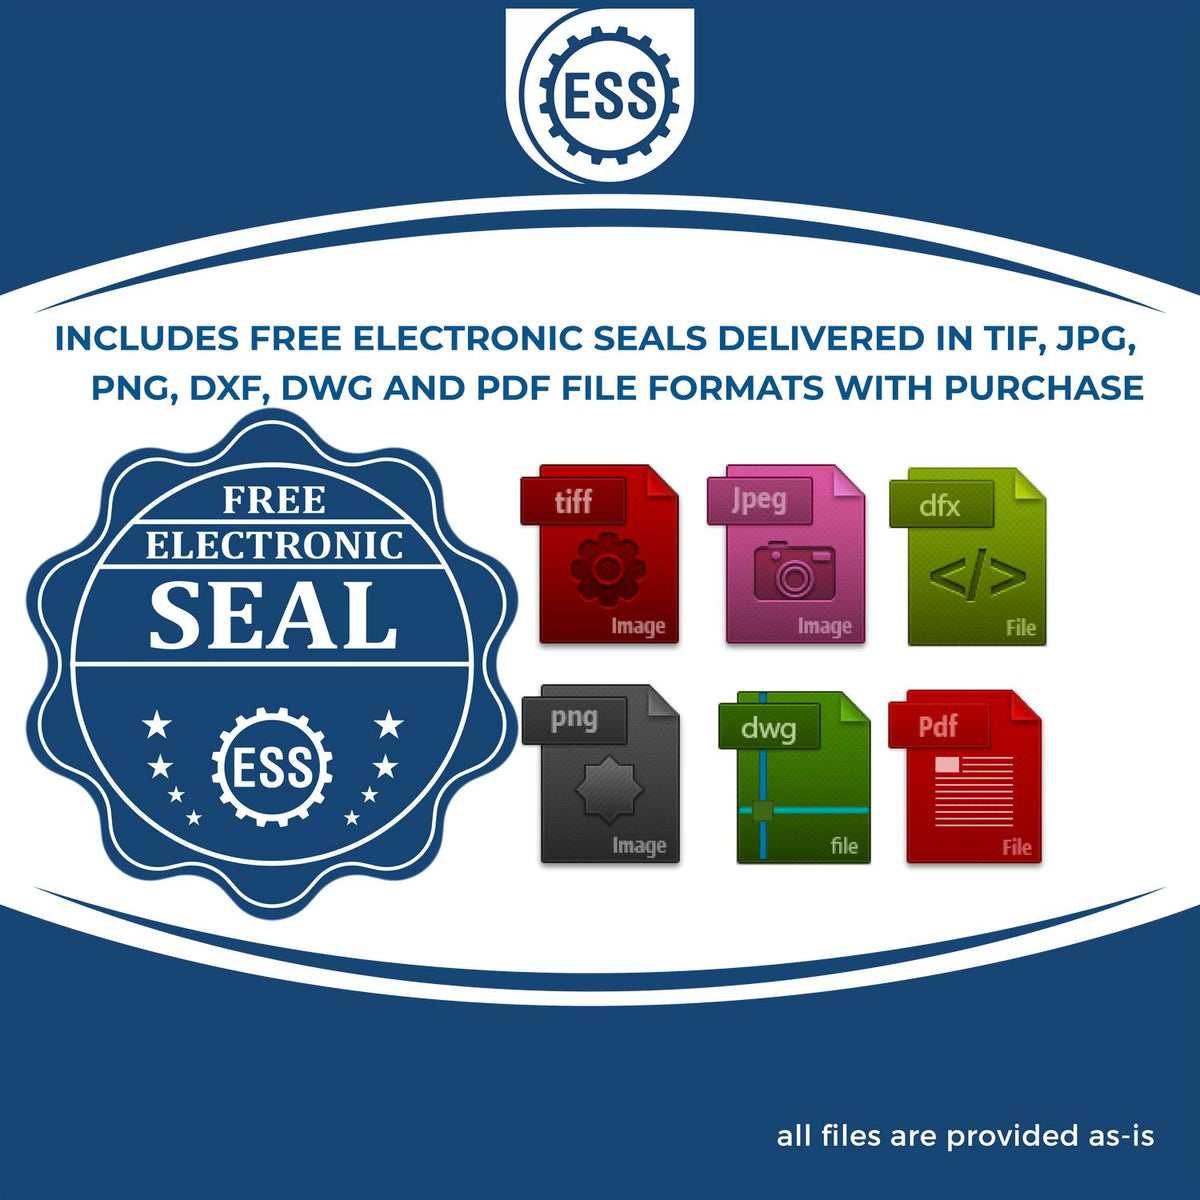 An infographic for the free electronic seal for the Hybrid Iowa Architect Seal illustrating the different file type icons such as DXF, DWG, TIF, JPG and PNG.